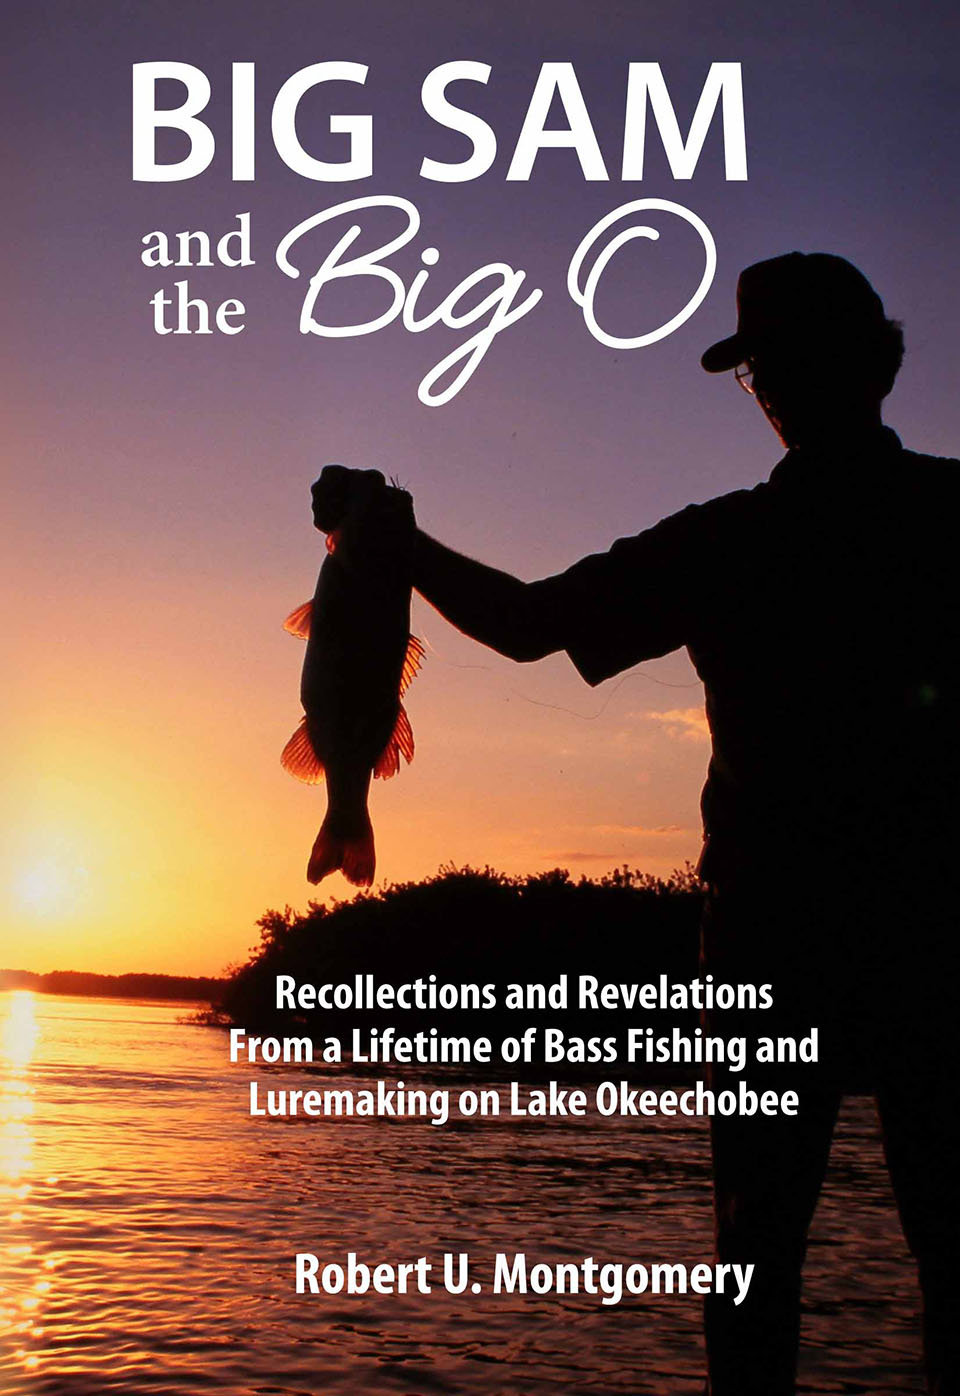 Pictured is the front cover titled “Big Sam and the Big O.”